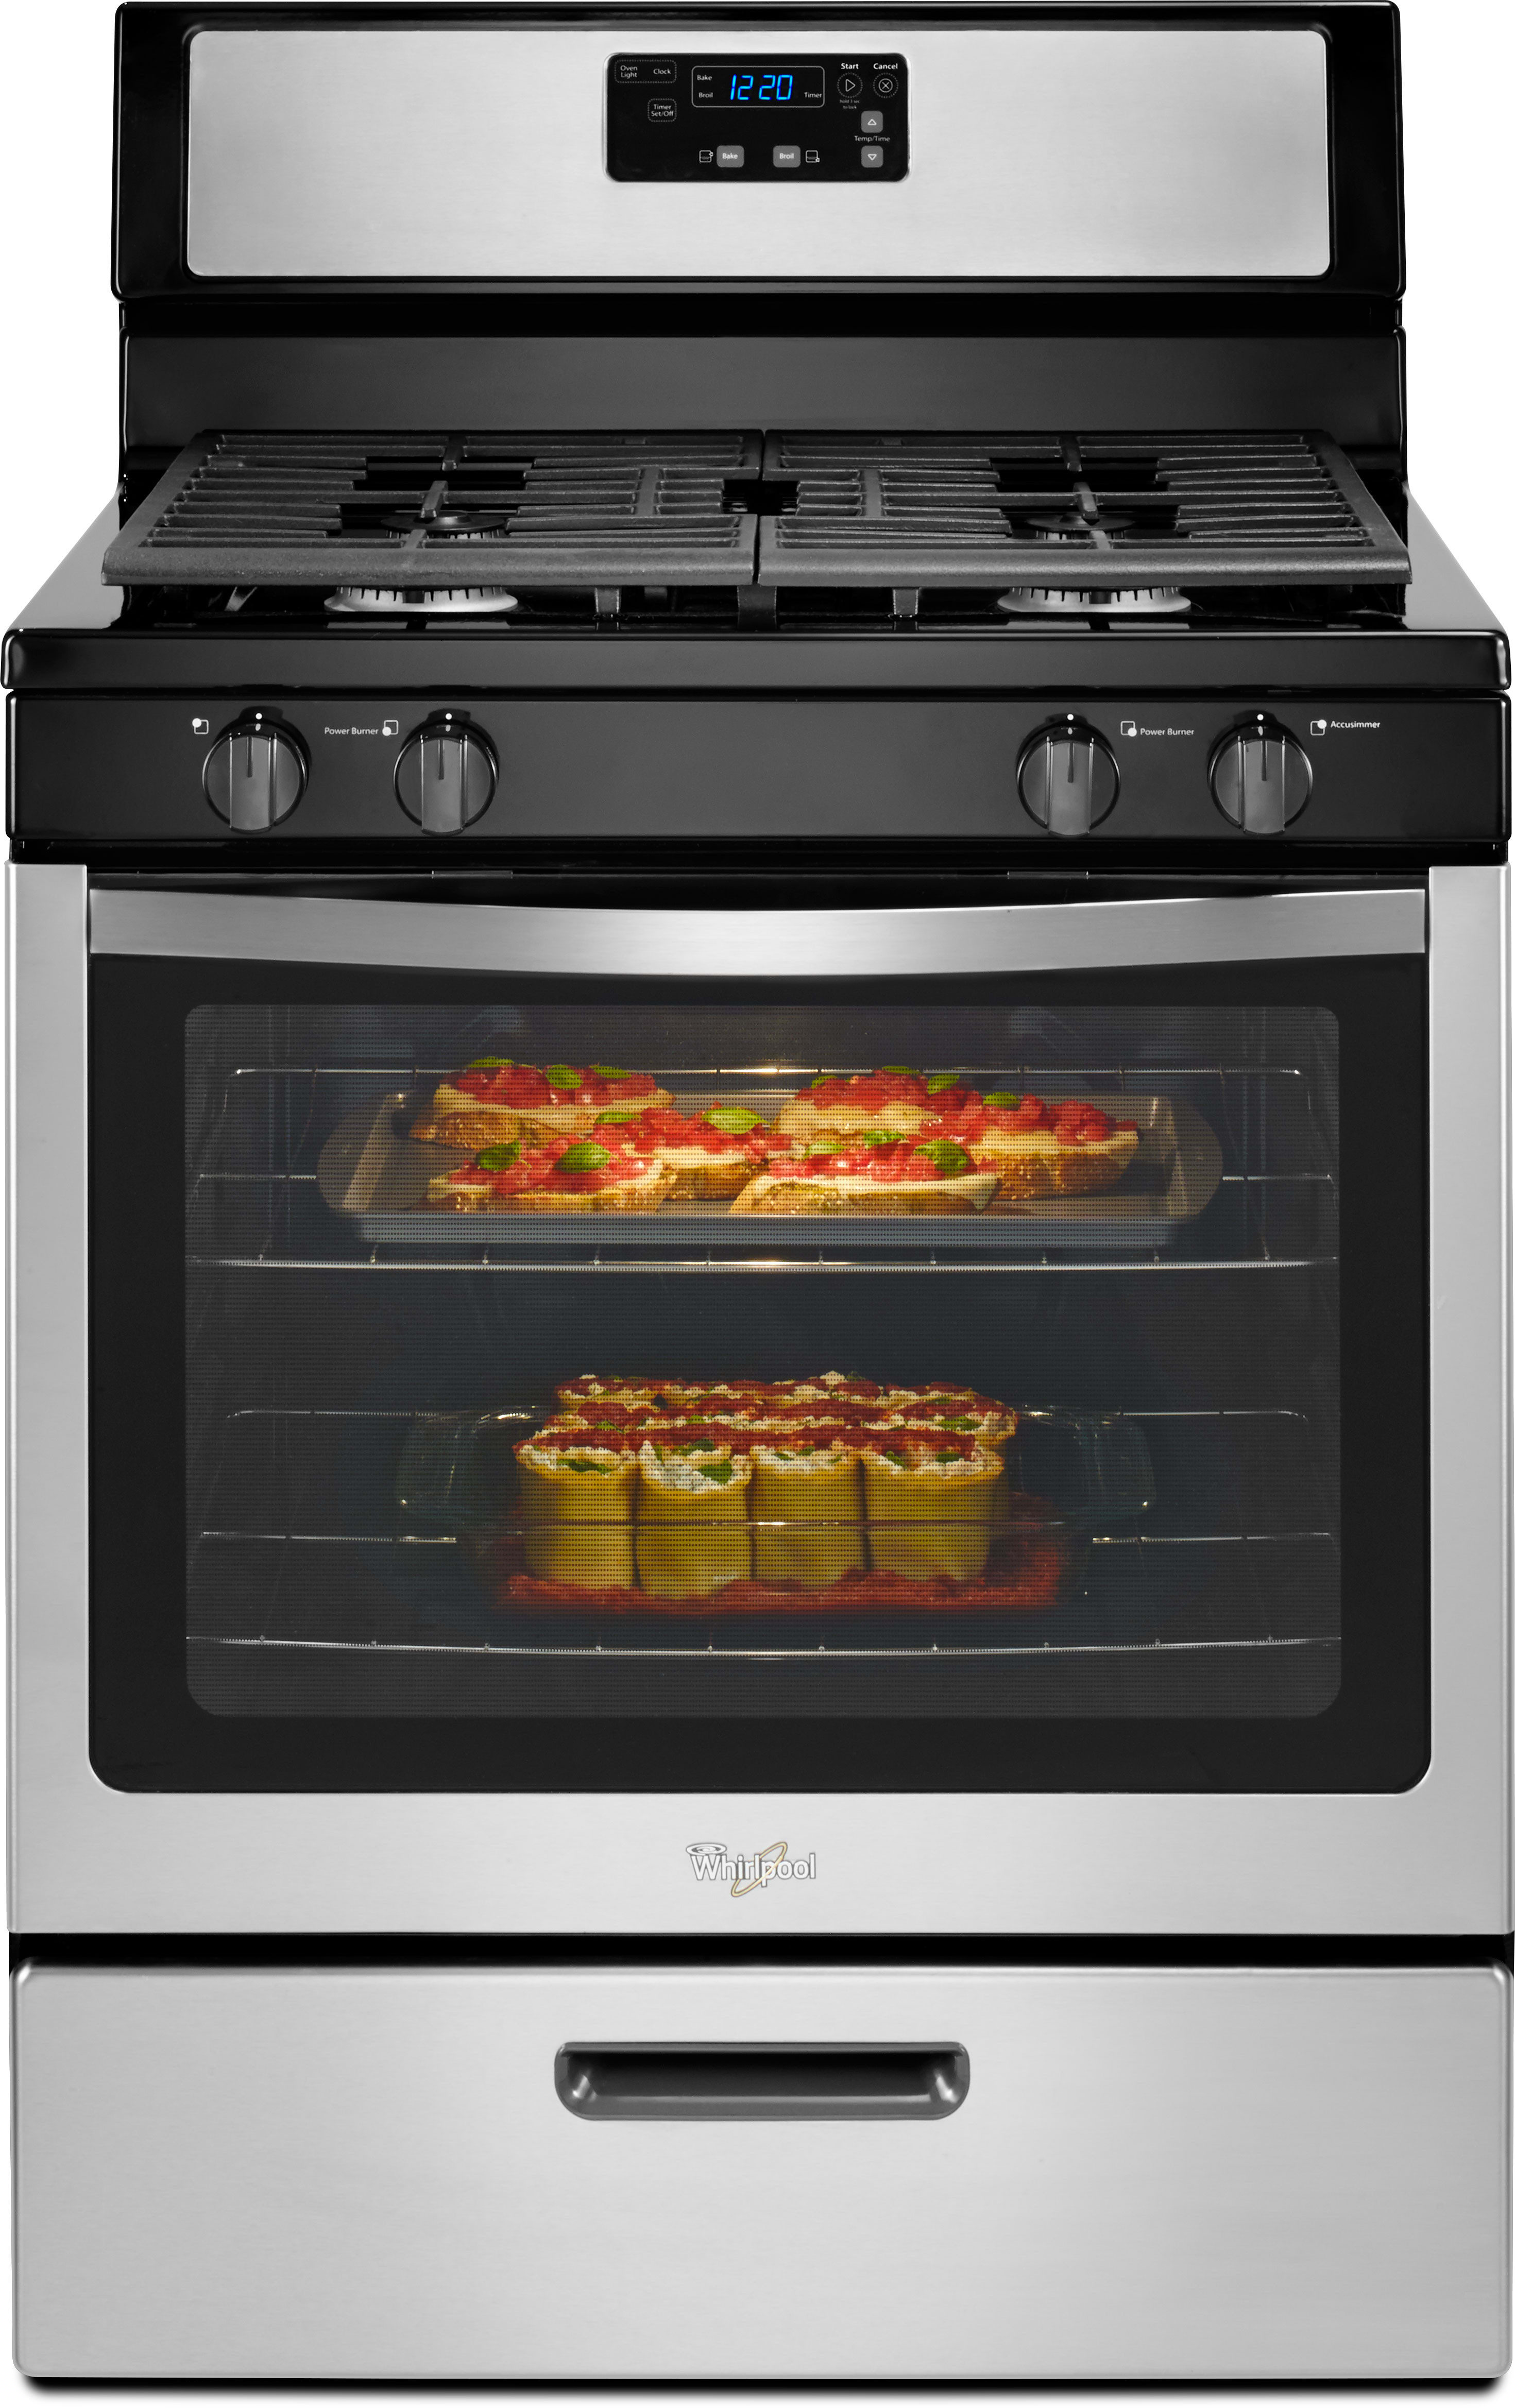 whirlpool-wfg320m0bs-30-inch-freestanding-gas-range-with-5-1-cu-ft